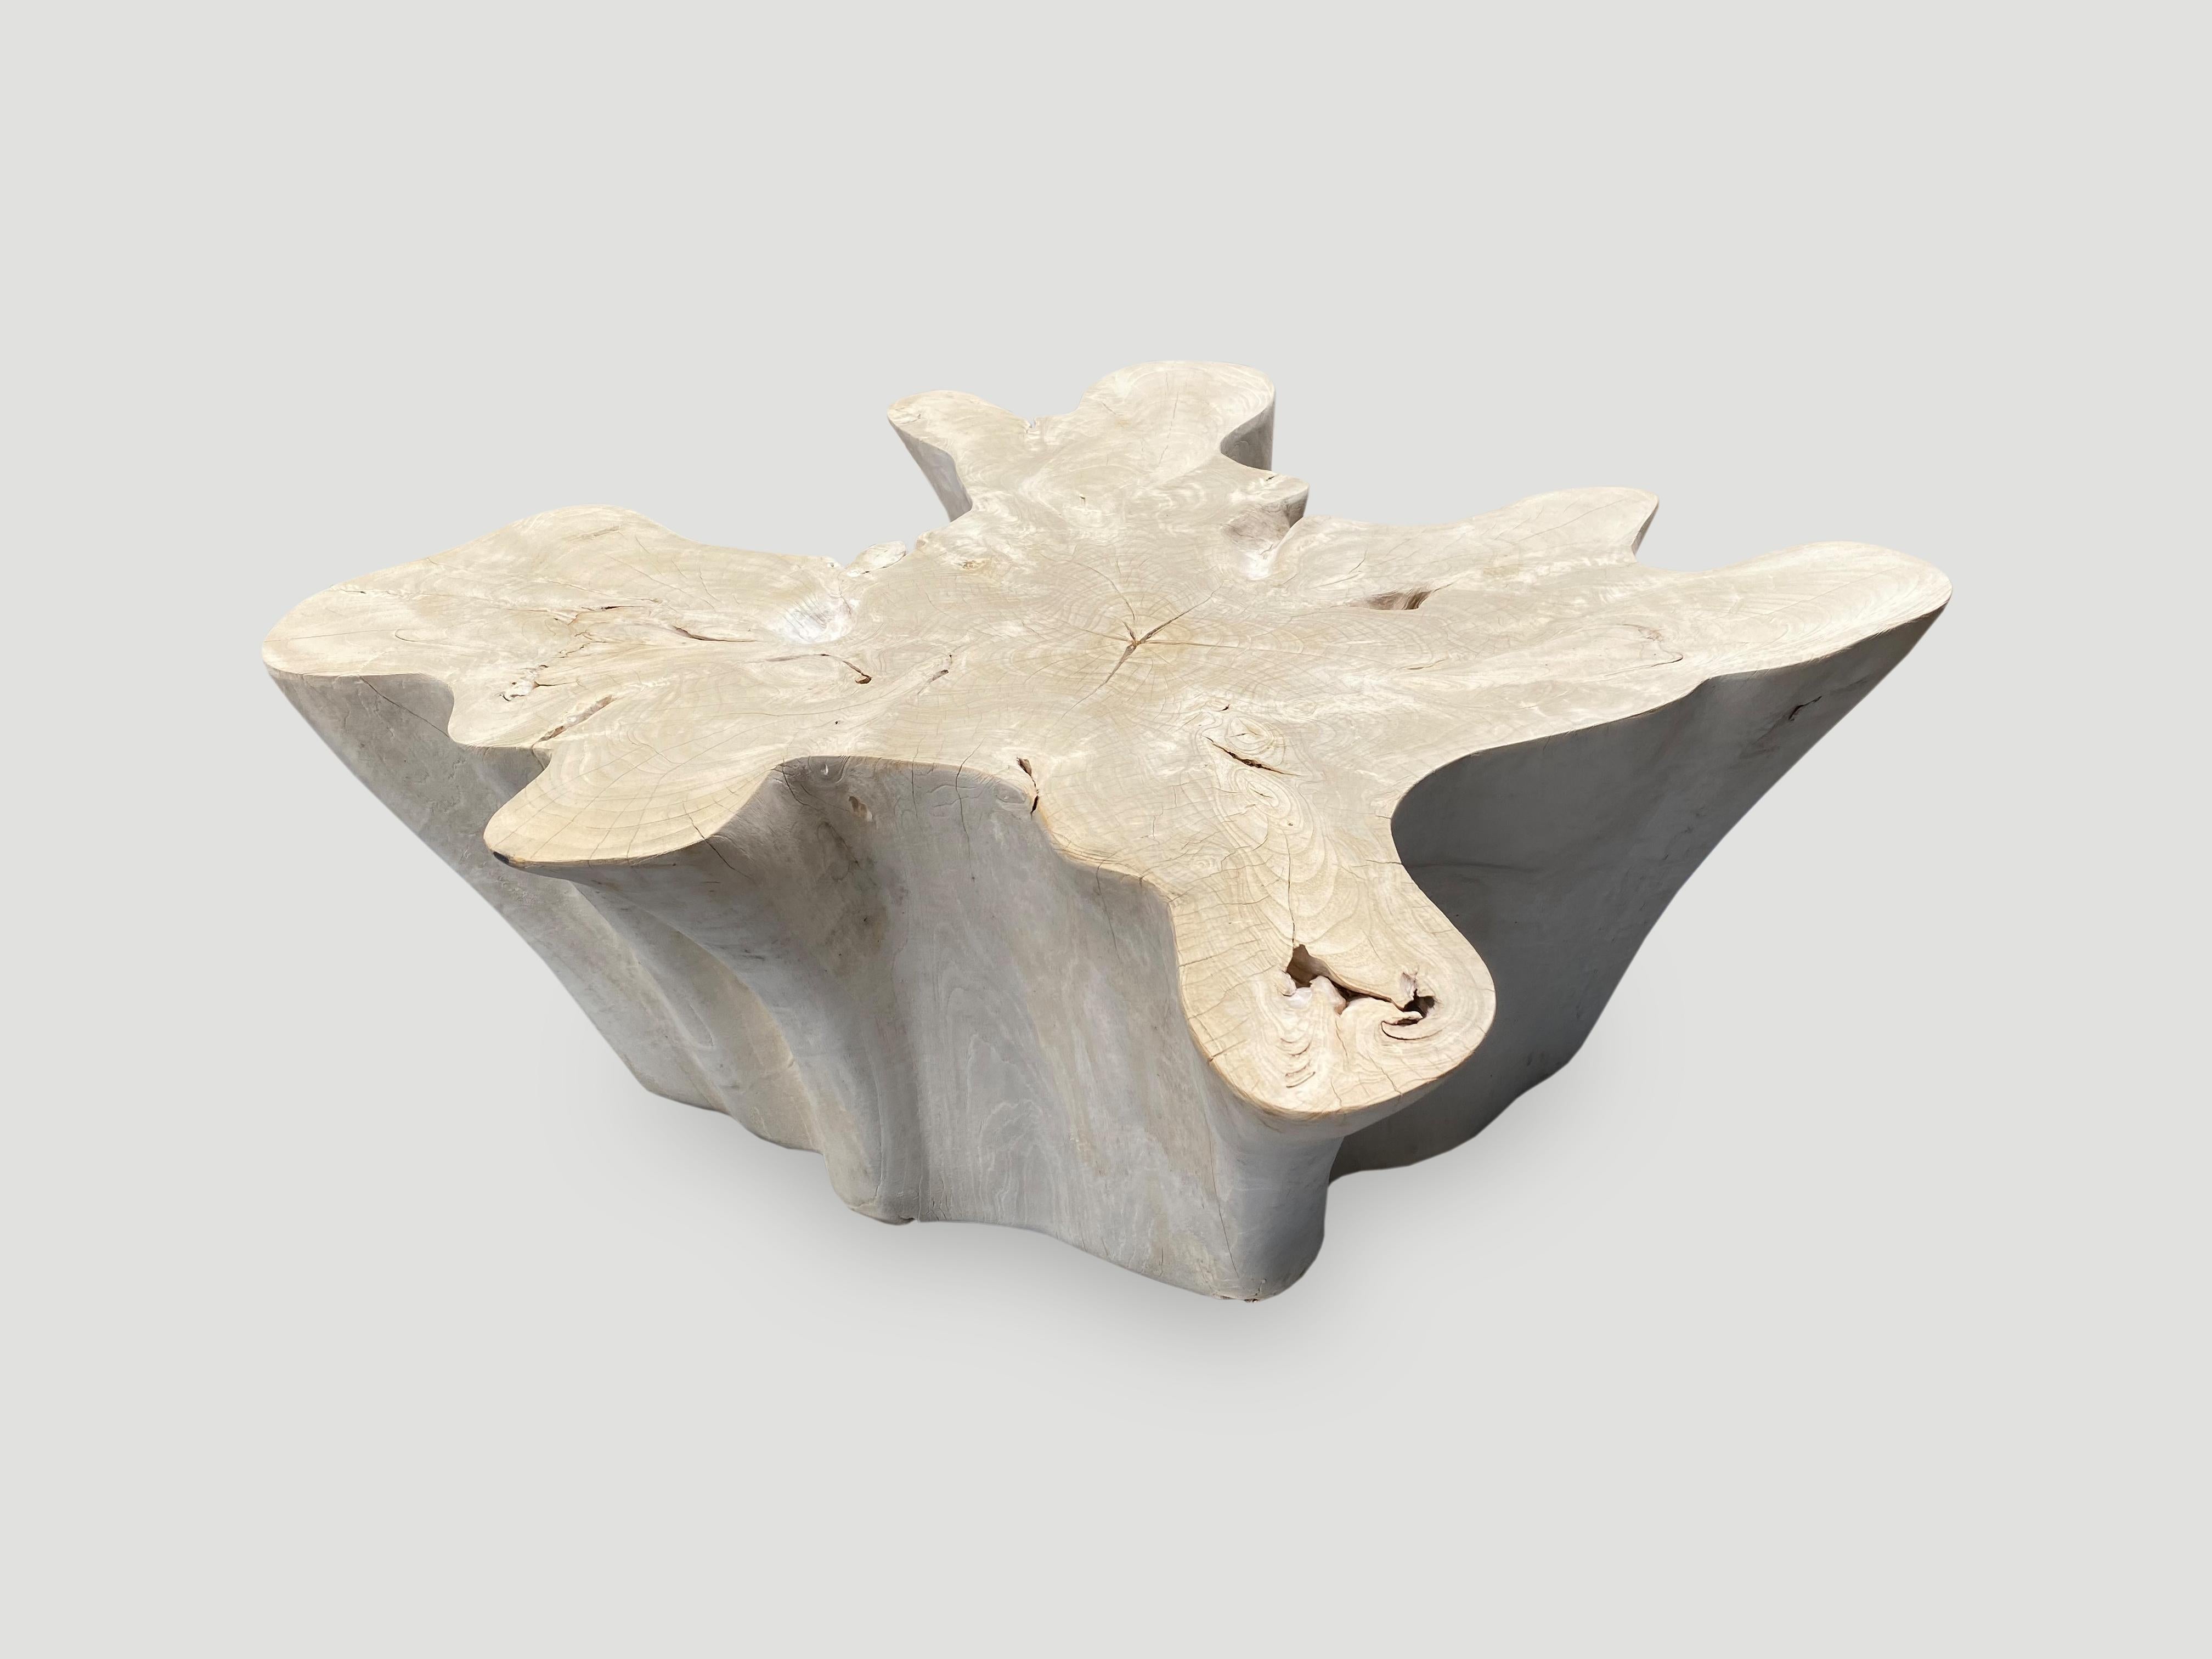 Impressive reclaimed bleached teak amorphous coffee table. A slight graduation from the bottom to the top. We have added a shellack to the top for a slight bone contrast and protection. The final image show the collection and how they can work